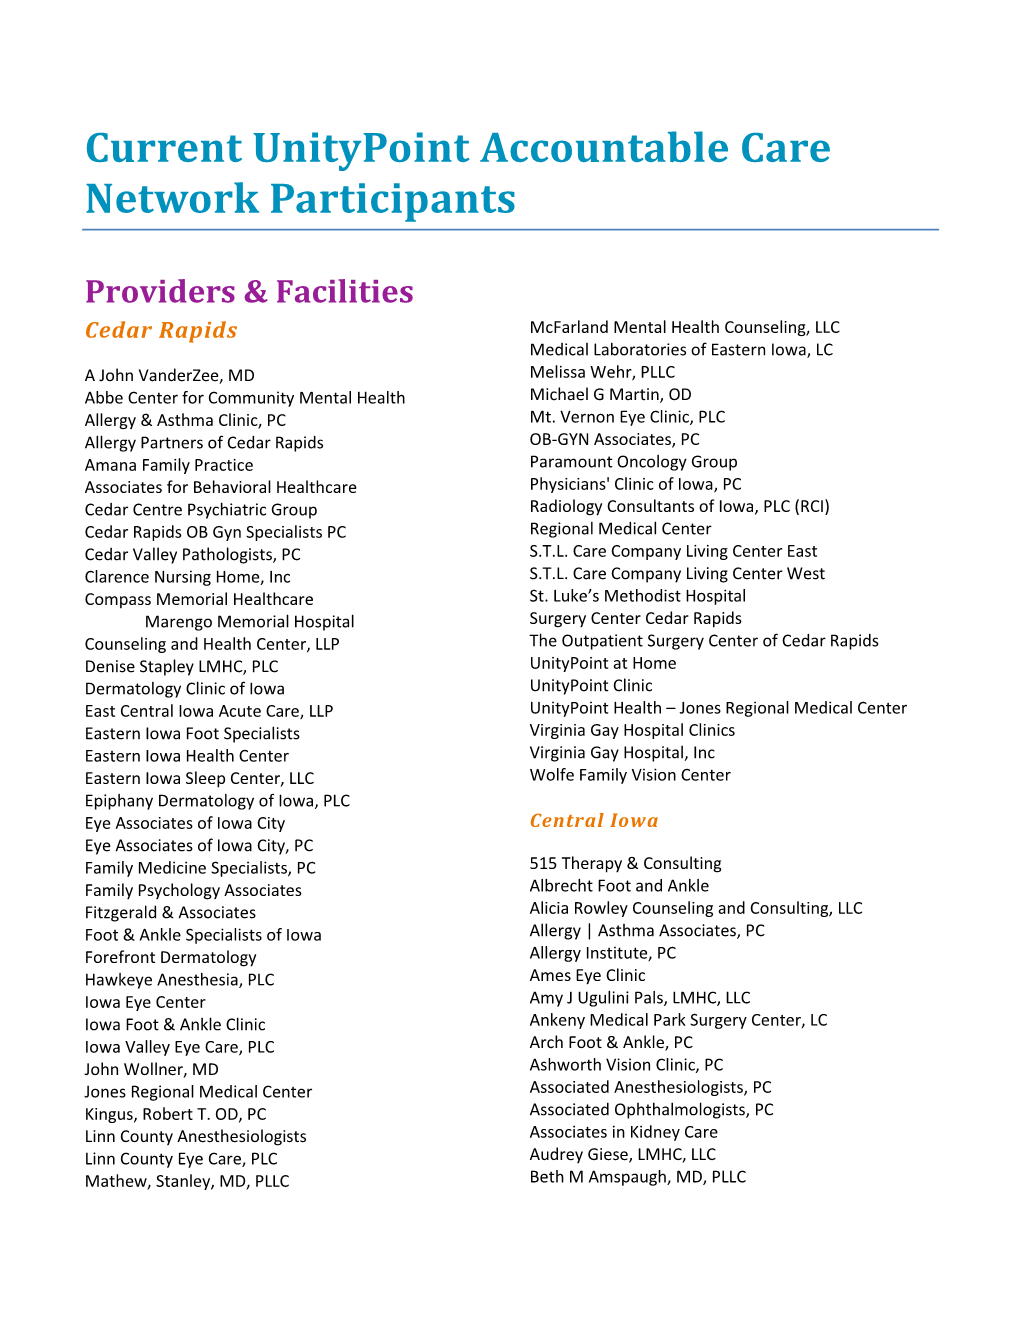 Current Unitypoint Accountable Care Network Participants